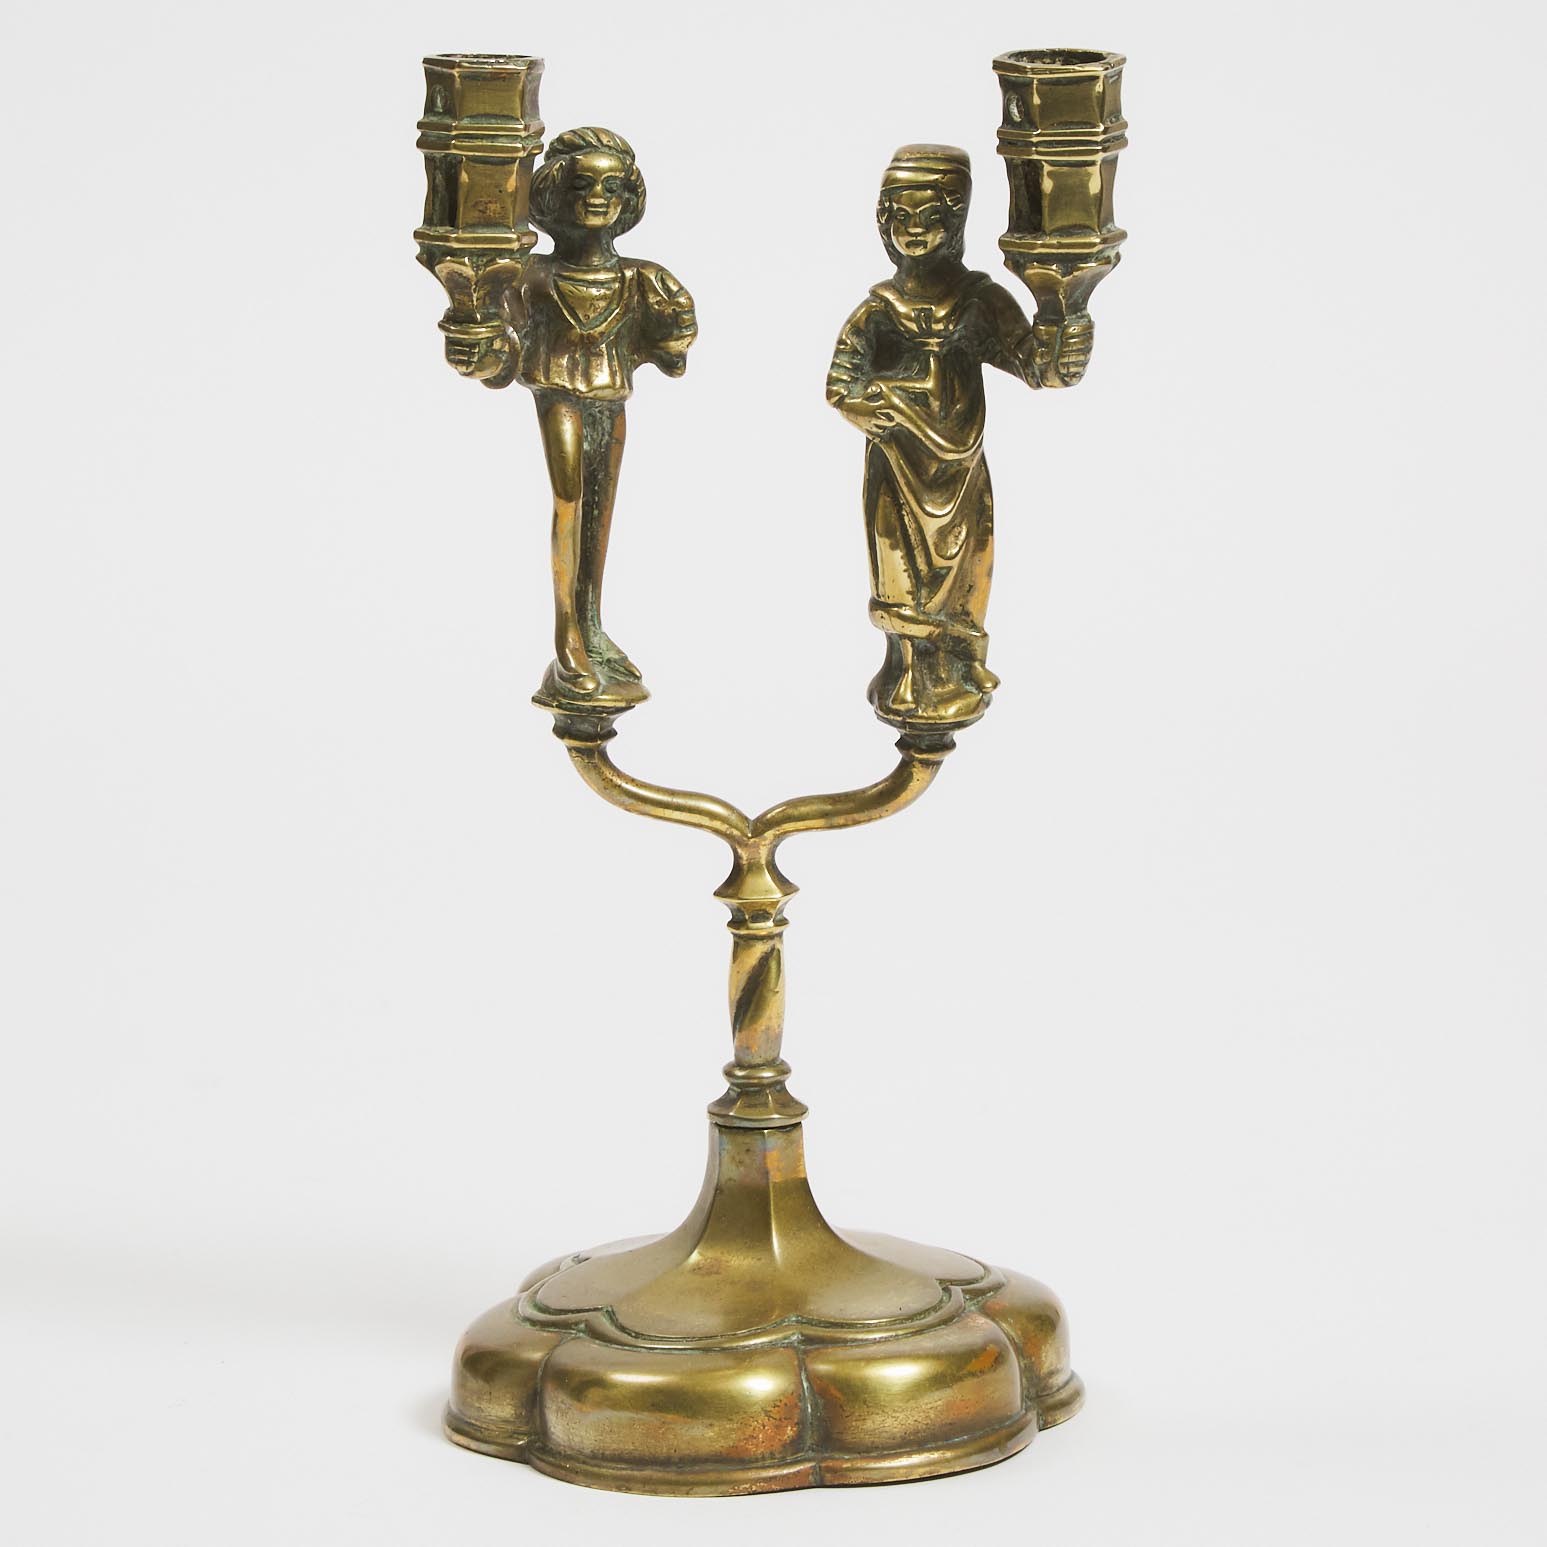 German Neo Gothic Double Figural Candlestick, 19th century